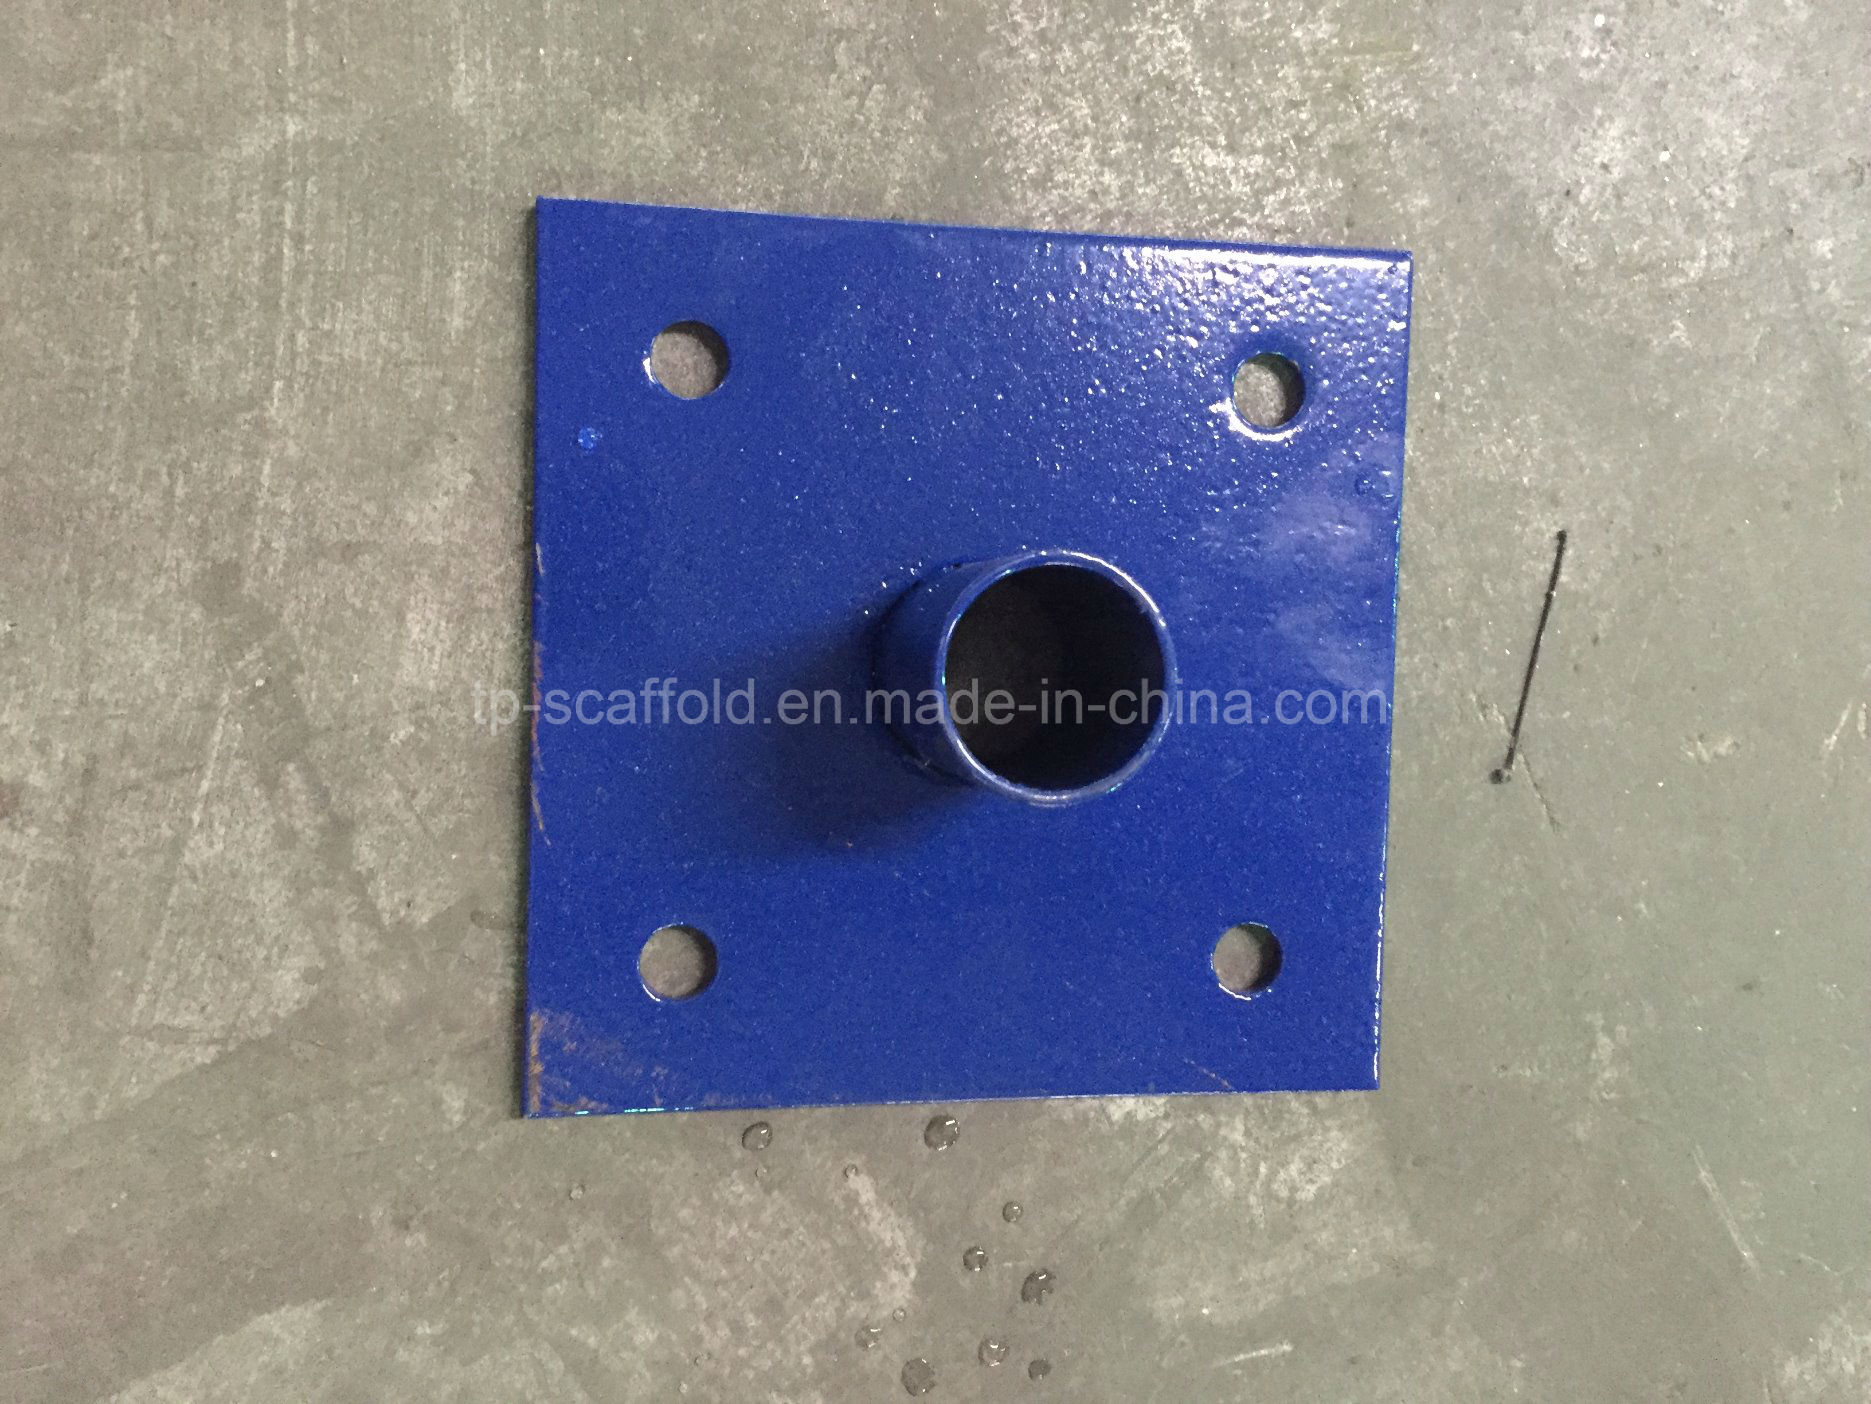 Scaffolding Tube and Fittings Scaffold Frame Part Painted Base Plate